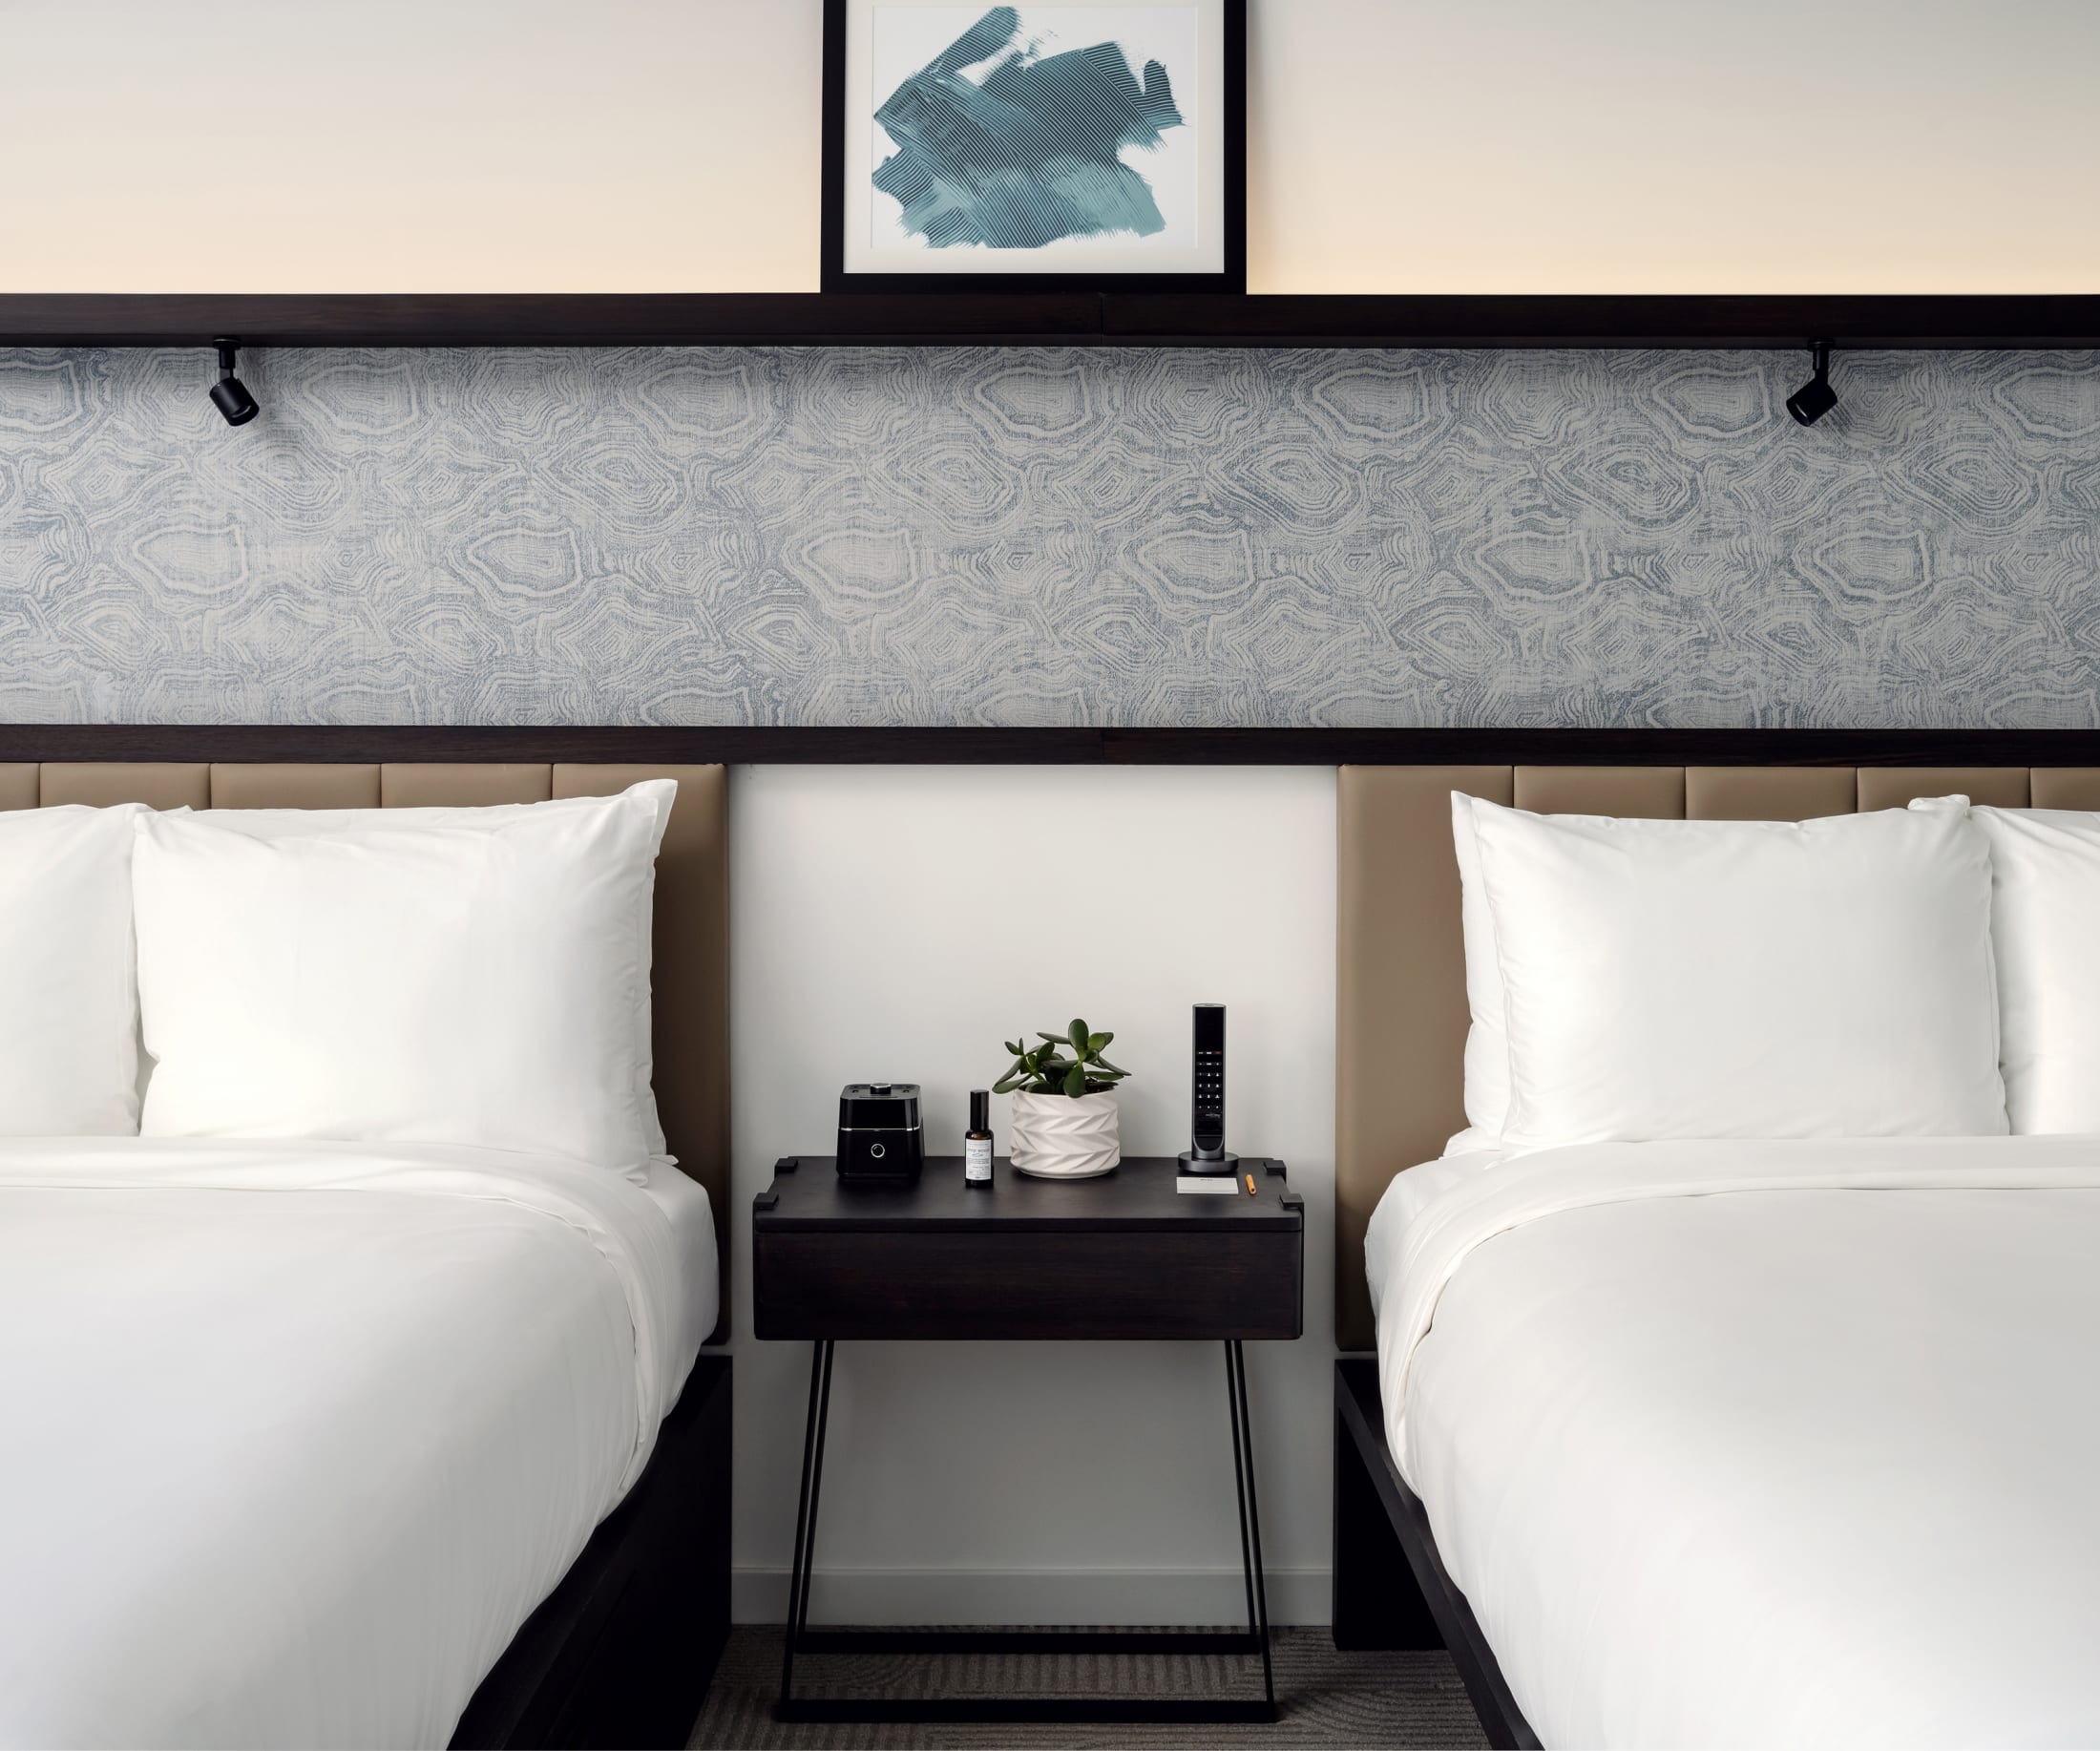 Arlo Midtown Accessible Two Double hotel room beds and side table